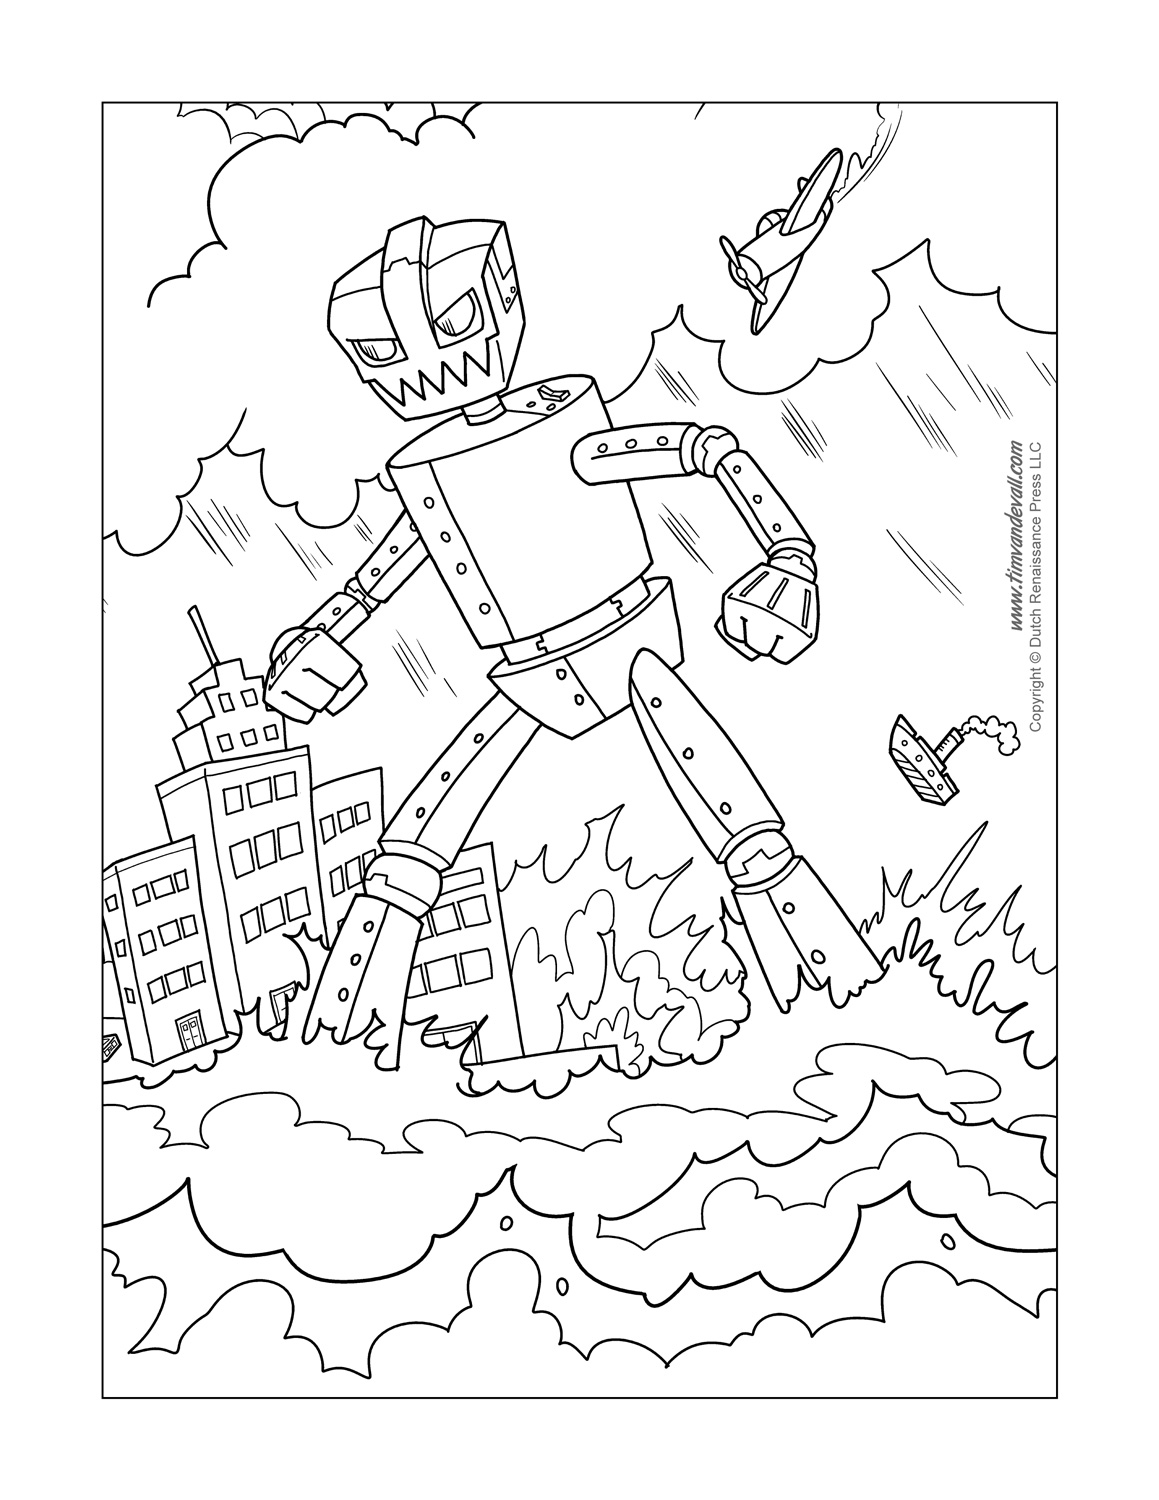 Thunder Storm coloring #6, Download drawings